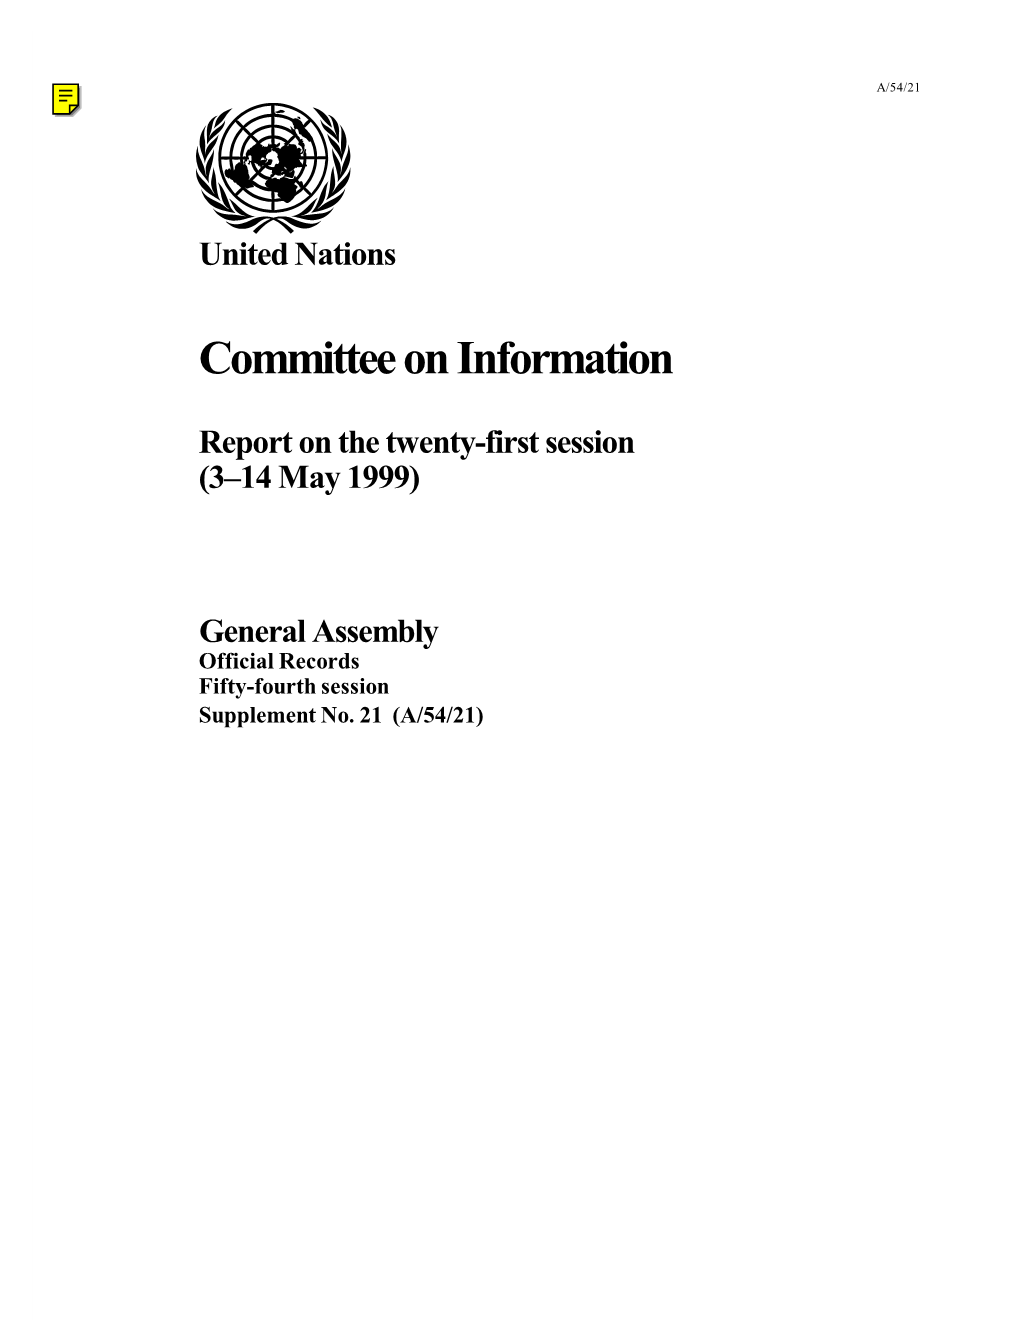 Committee on Information